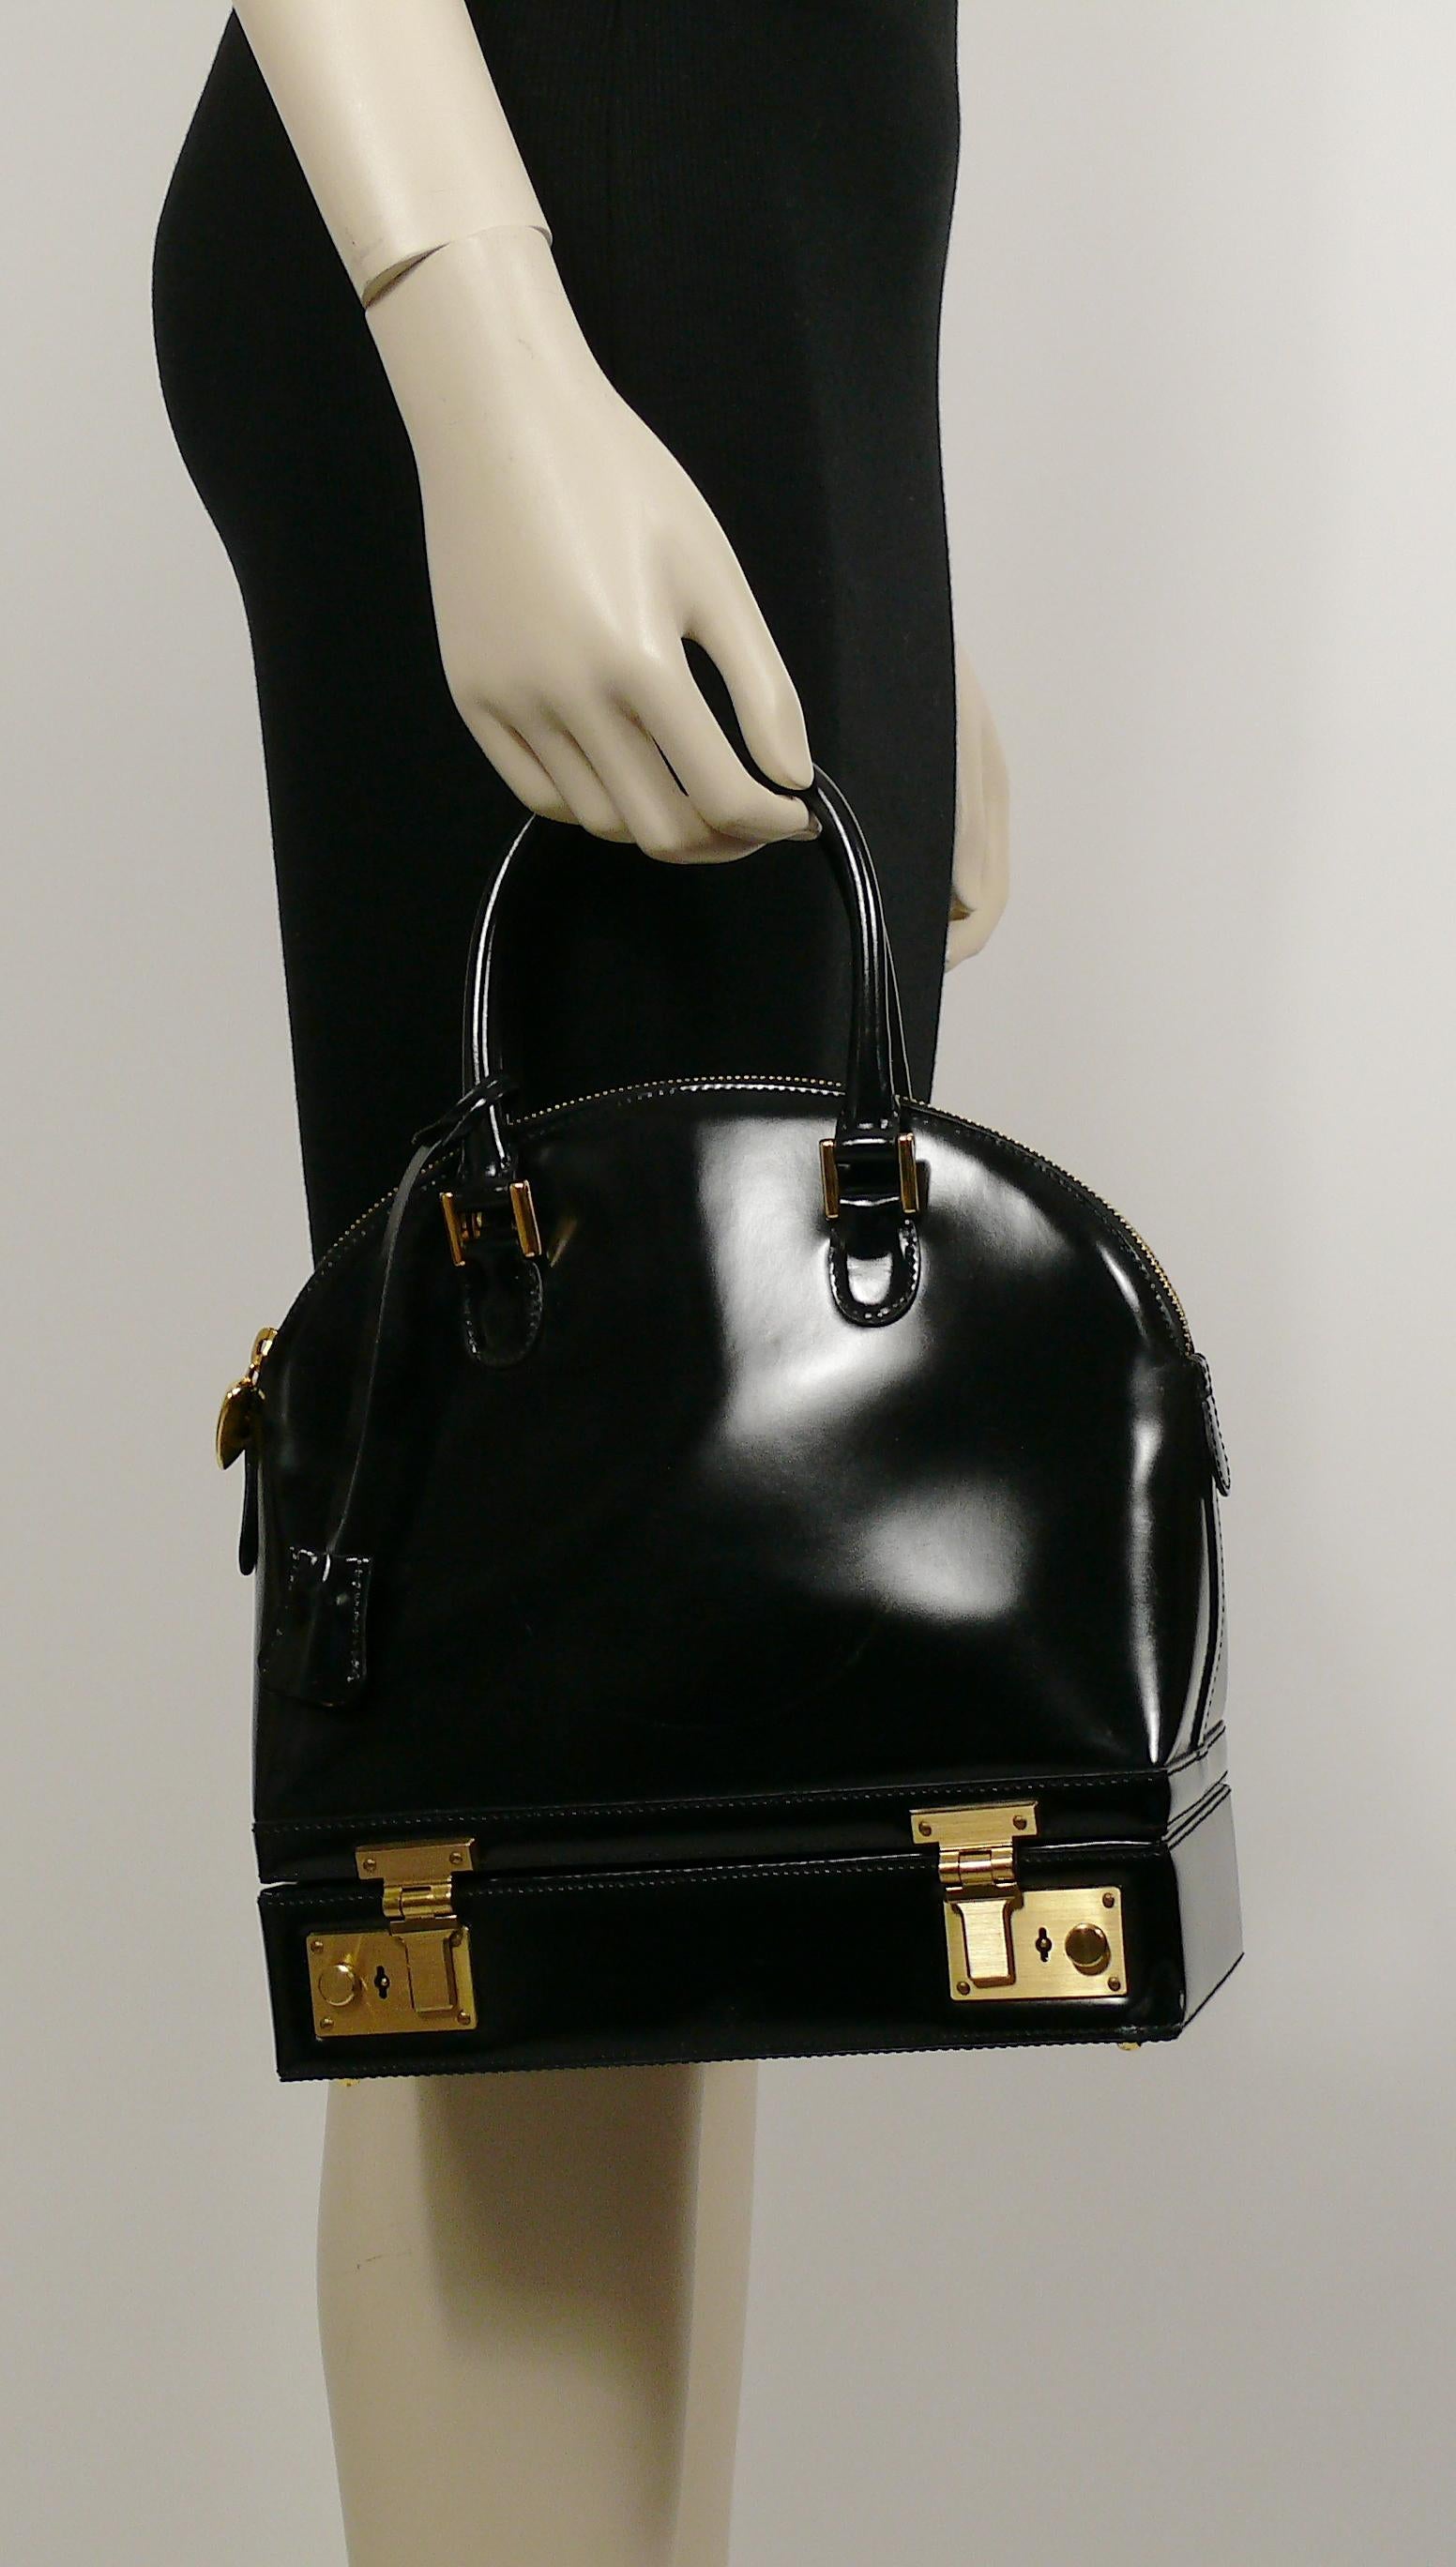 Women's Moschino Vintage Black Patent Leather Sac Mallette Top Handle Bag